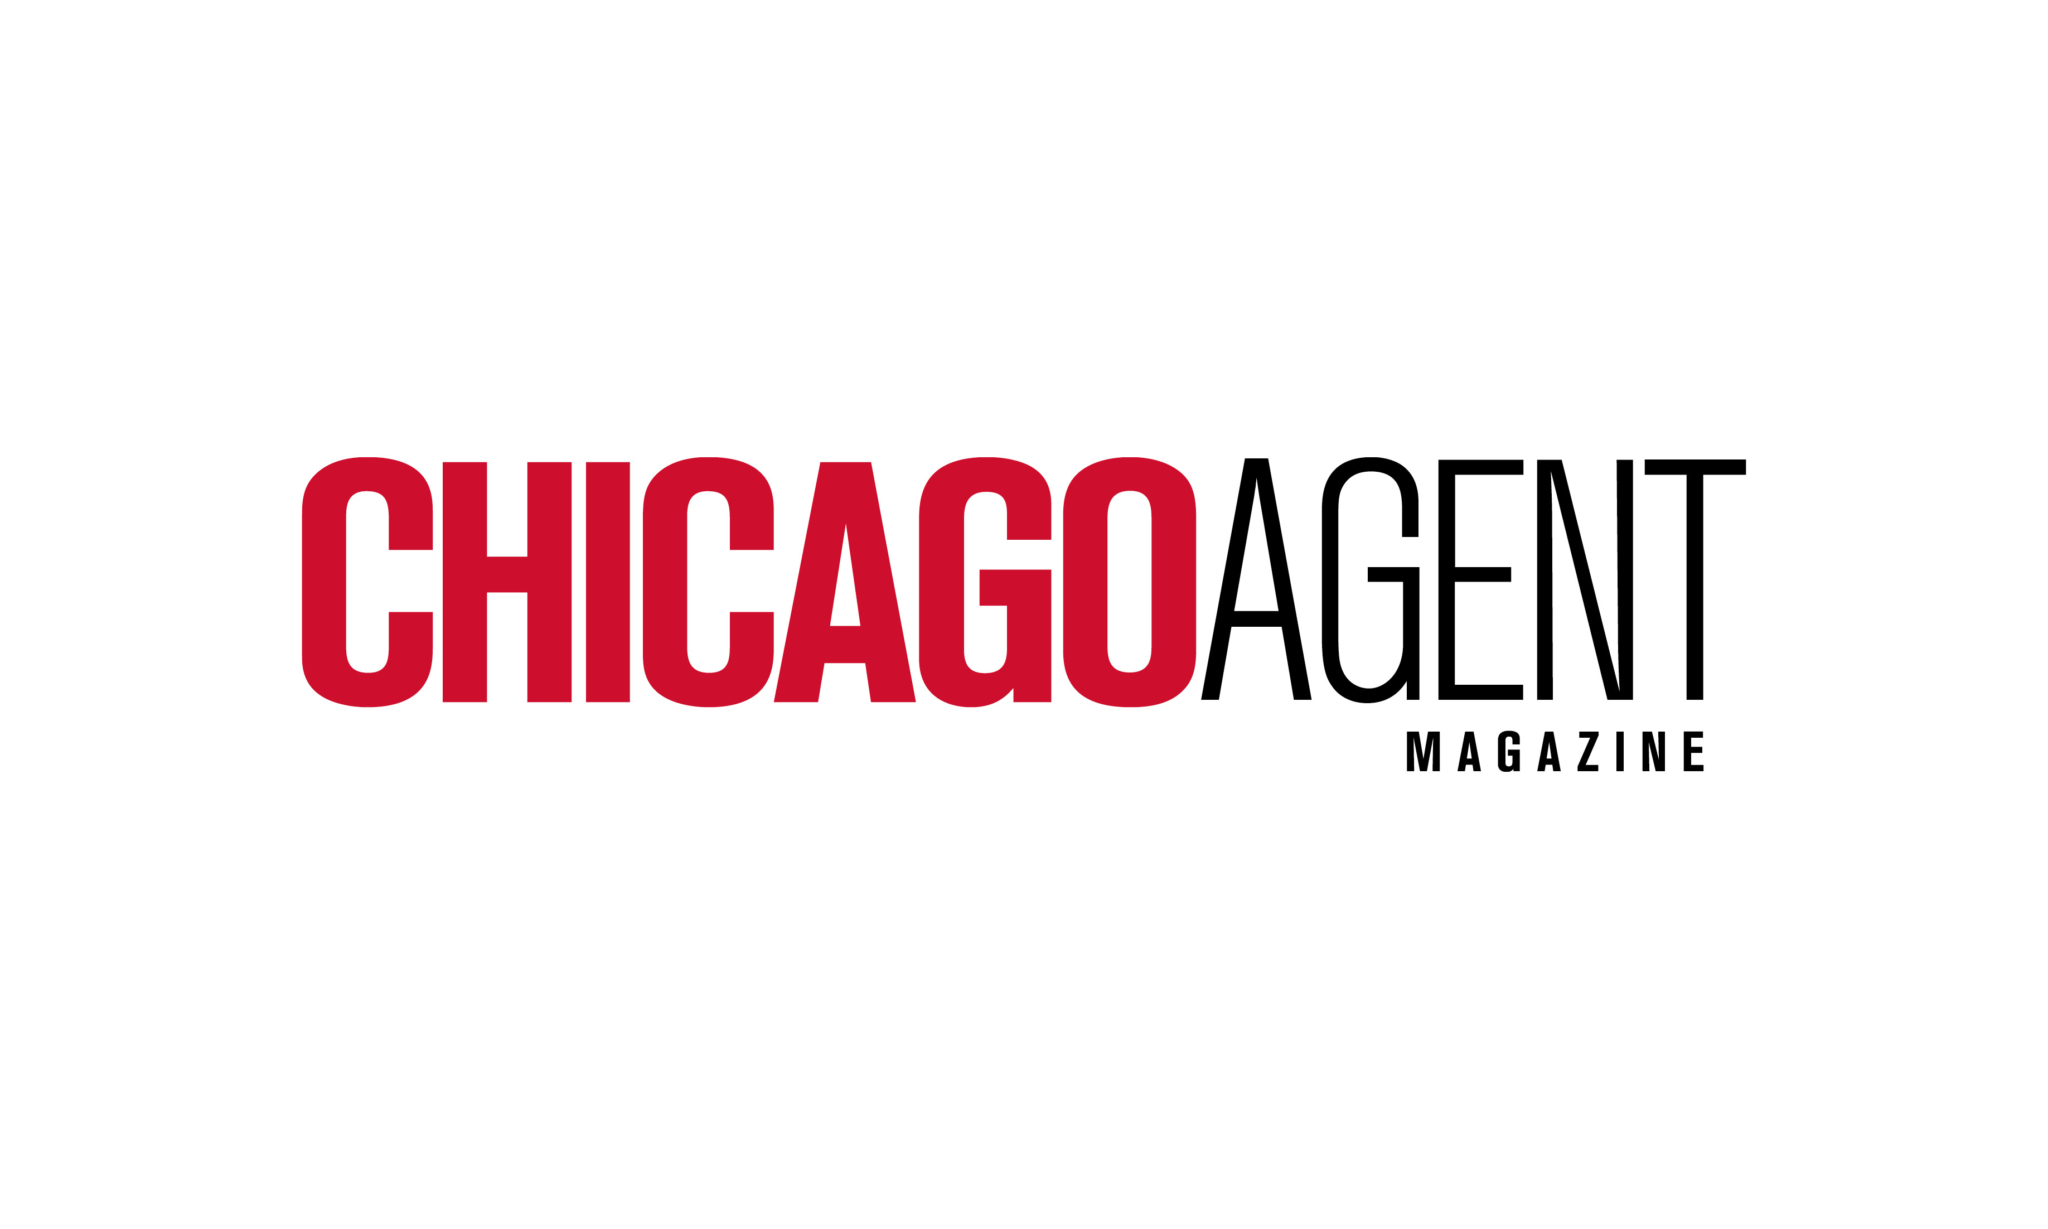 About Chicago Agent Magazine